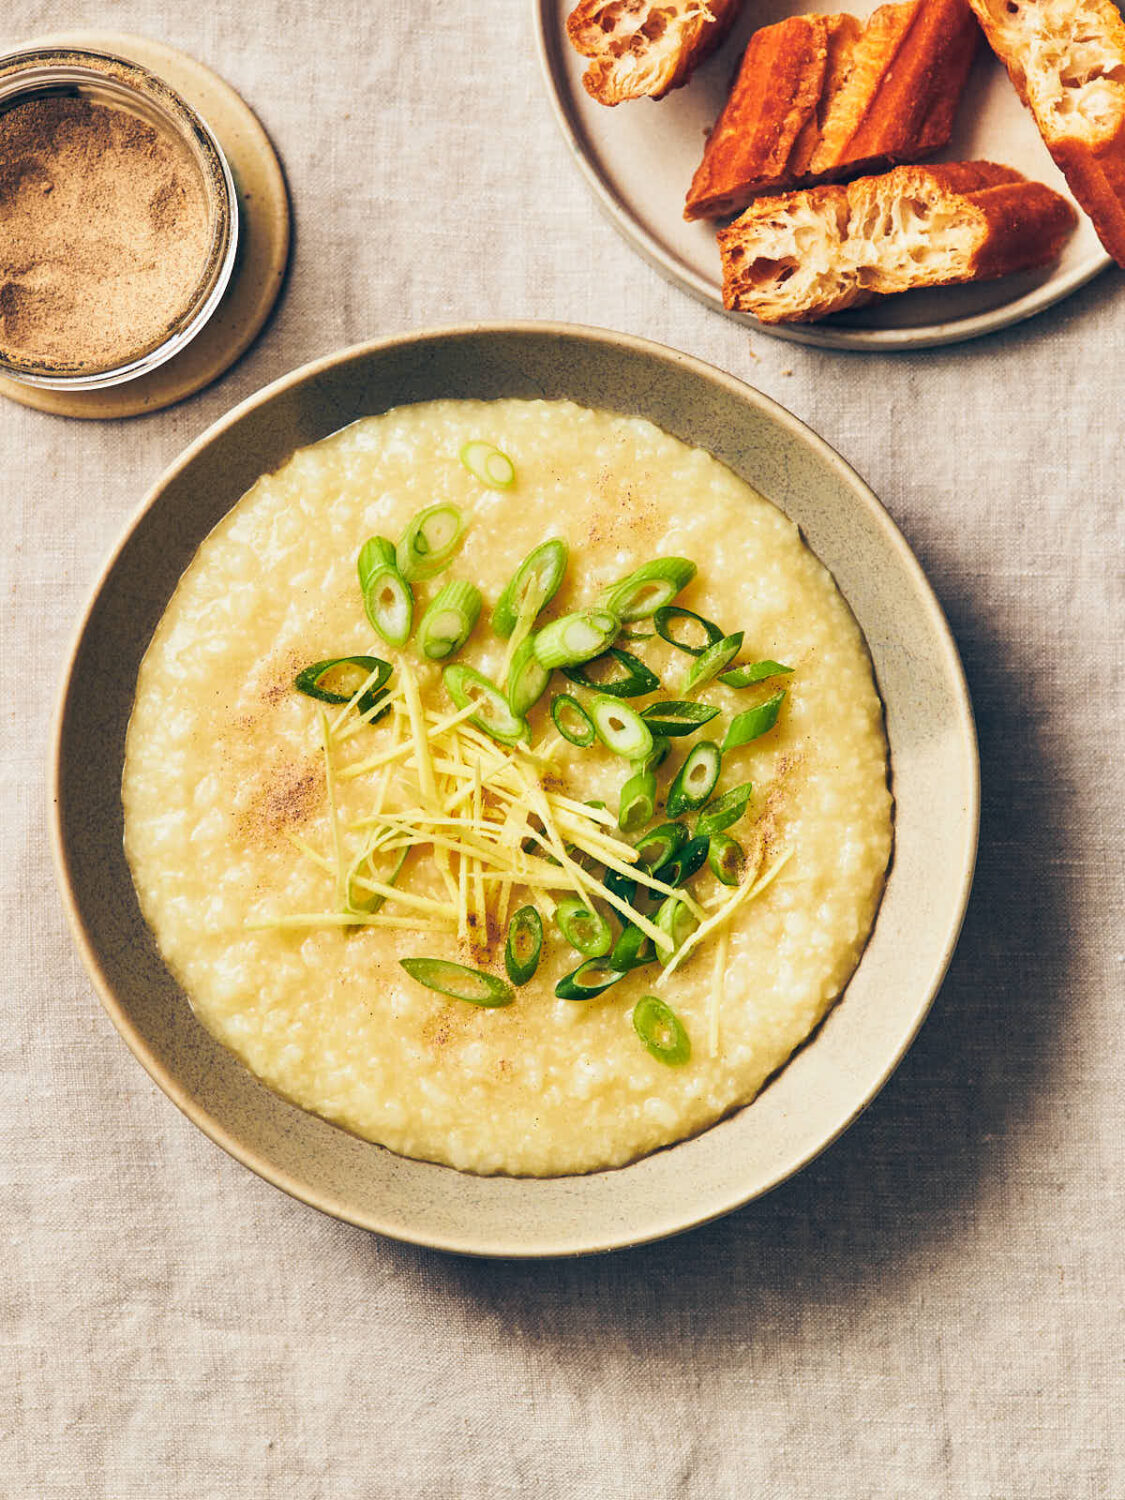 A bowl of vegan congee topped with scallions (green onions), fresh ginger, and white pepper